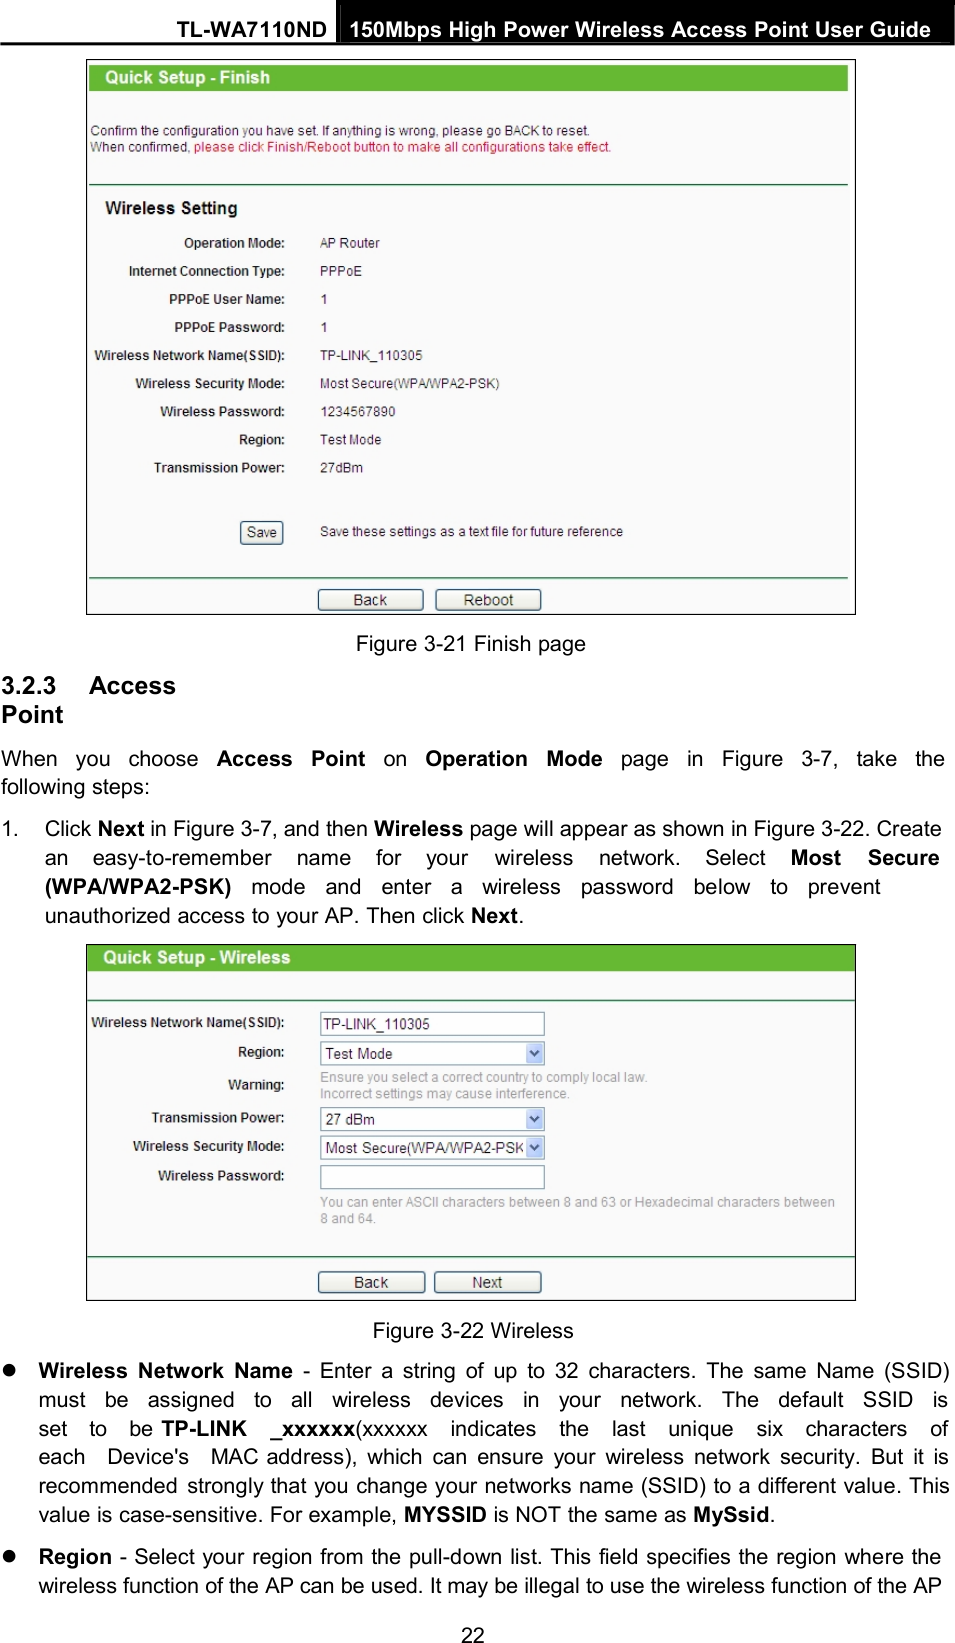 TL-WA7110ND 150Mbps High Power Wireless Access Point User Guide3.2.3 AccessPointFigure 3-21 Finish pageWhen you choose Access Point on Operation Mode page in Figure 3-7, take thefollowing steps:1. Click Next in Figure 3-7, and then Wireless page will appear as shown in Figure 3-22. Createan easy-to-remember name for your wireless network. Select Most Secure(WPA/WPA2-PSK) mode and enter a wireless password below to preventunauthorized access to your AP. Then click Next.Figure 3-22 WirelessWireless Network Name - Enter a string of up to 32 characters. The same Name (SSID)must be assigned to all wireless devices in your network. The default SSID isset to be TP-LINK _xxxxxx(xxxxxx indicates the last unique six characters ofeach Device&apos;s MAC address), which can ensure your wireless network security. But it isrecommended strongly that you change your networks name (SSID) to a different value. Thisvalue is case-sensitive. For example, MYSSID is NOT the same as MySsid.Region - Select your region from the pull-down list. This field specifies the region where thewireless function of the AP can be used. It may be illegal to use the wireless function of the AP22